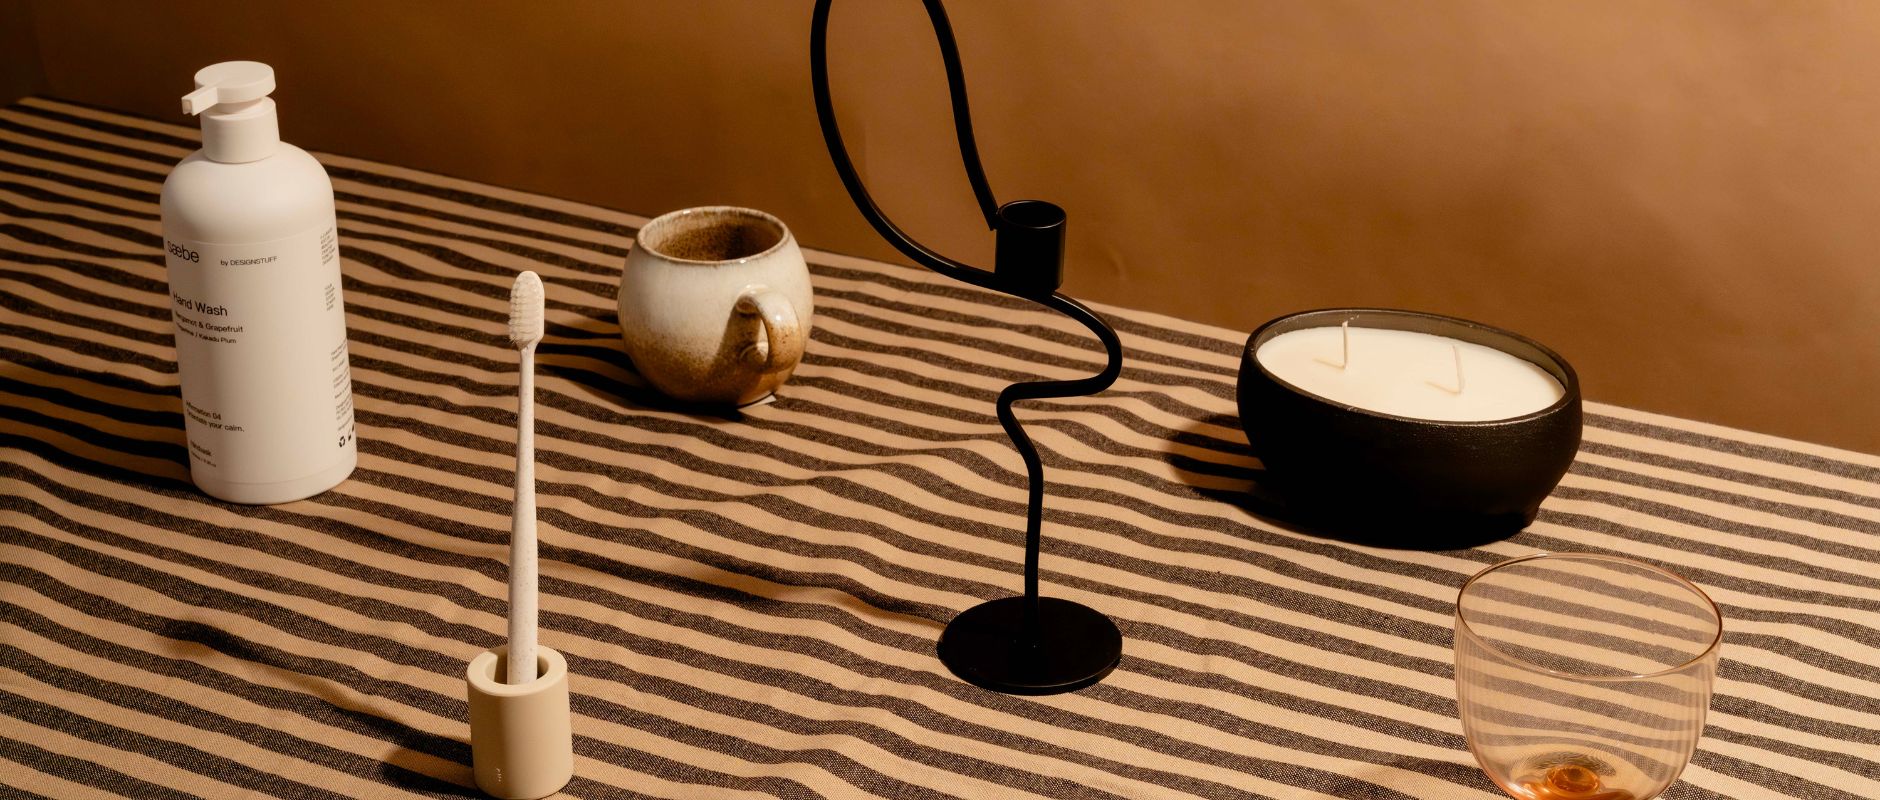 A beige-themed gift guide displayed on a striped brown and black tablecloth. Featured items include a hand wash bottle, toothbrush in a holder, sculptural candle holder, candle in a pot, and a blush-tinted glass.